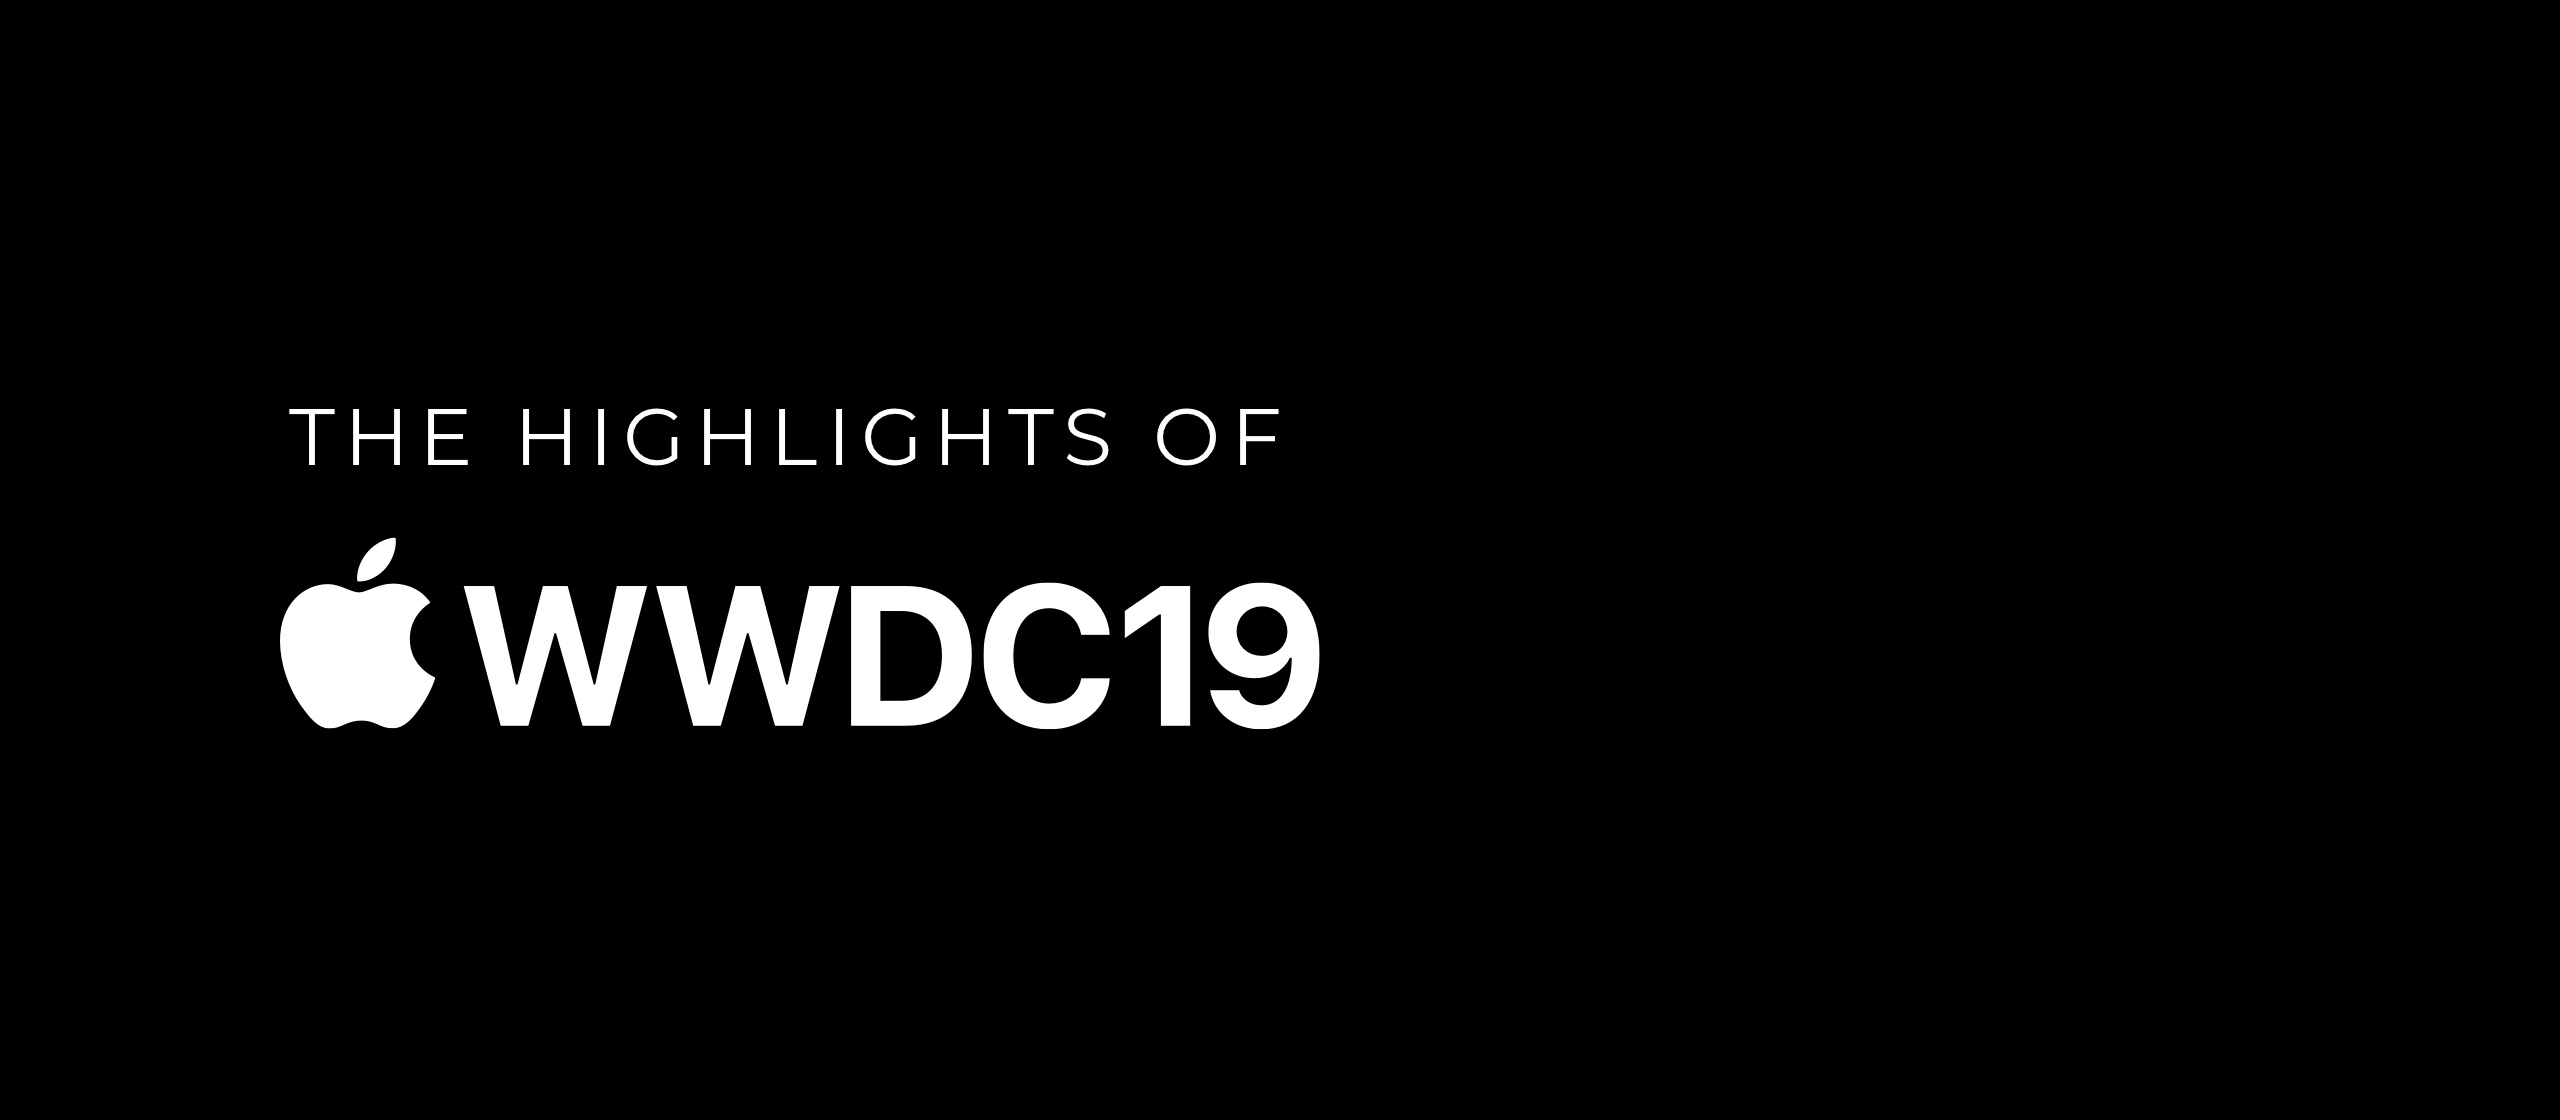 let’s dev Blog | Apple WWDC 2019: These are the highlights of the keynote